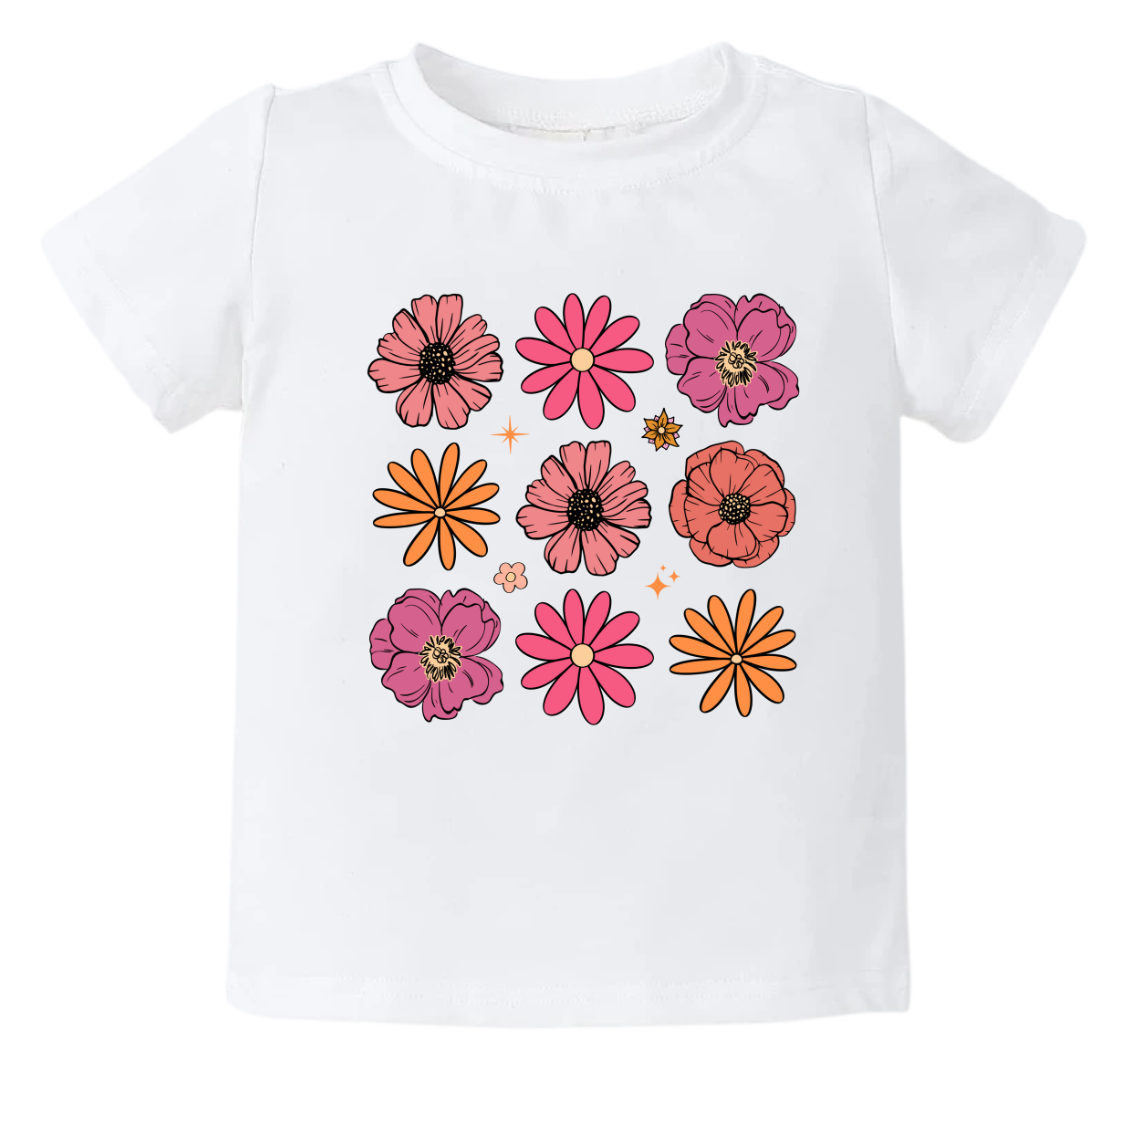 Adorable Baby Onesie & Kid T-Shirt with Charming Flower Design - Perfect for Your Little Blossoms! Shop Now for Delightful Floral Outfits at Mango House Creations.  #KidsFashion #CuteFlowers #BabyApparel #TrendyKids